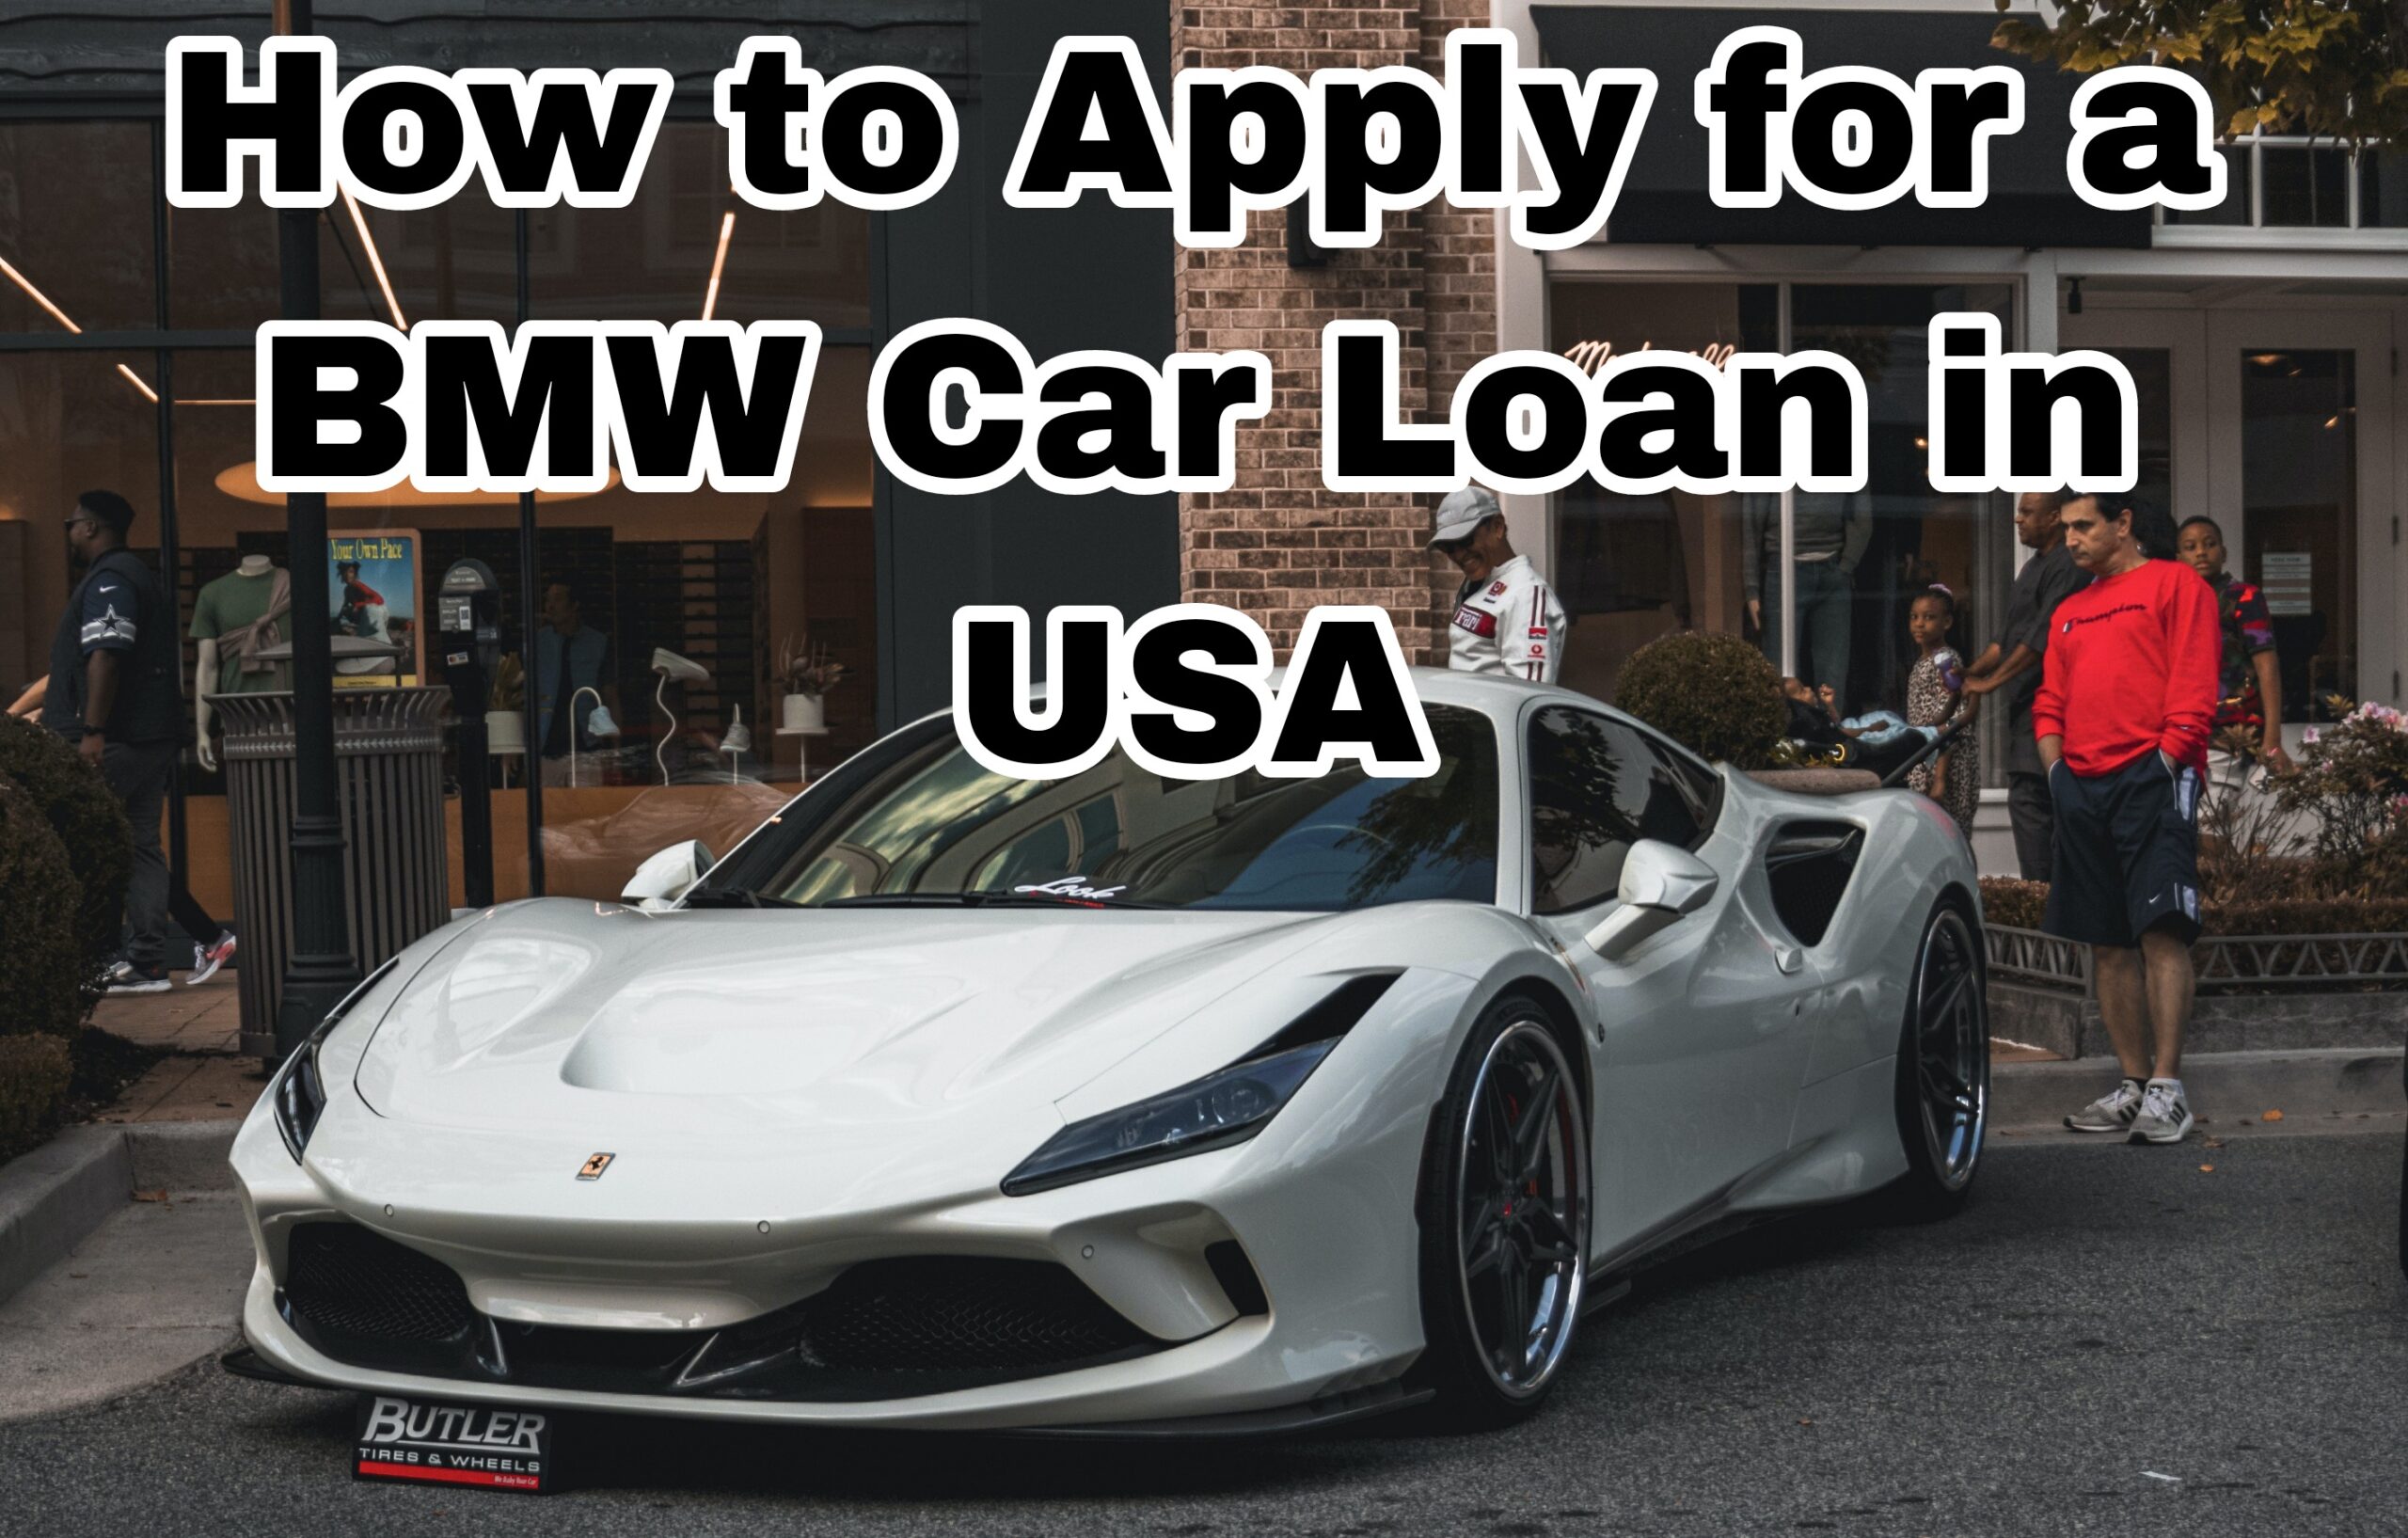 How to Apply for a BMW Car Loan in USA